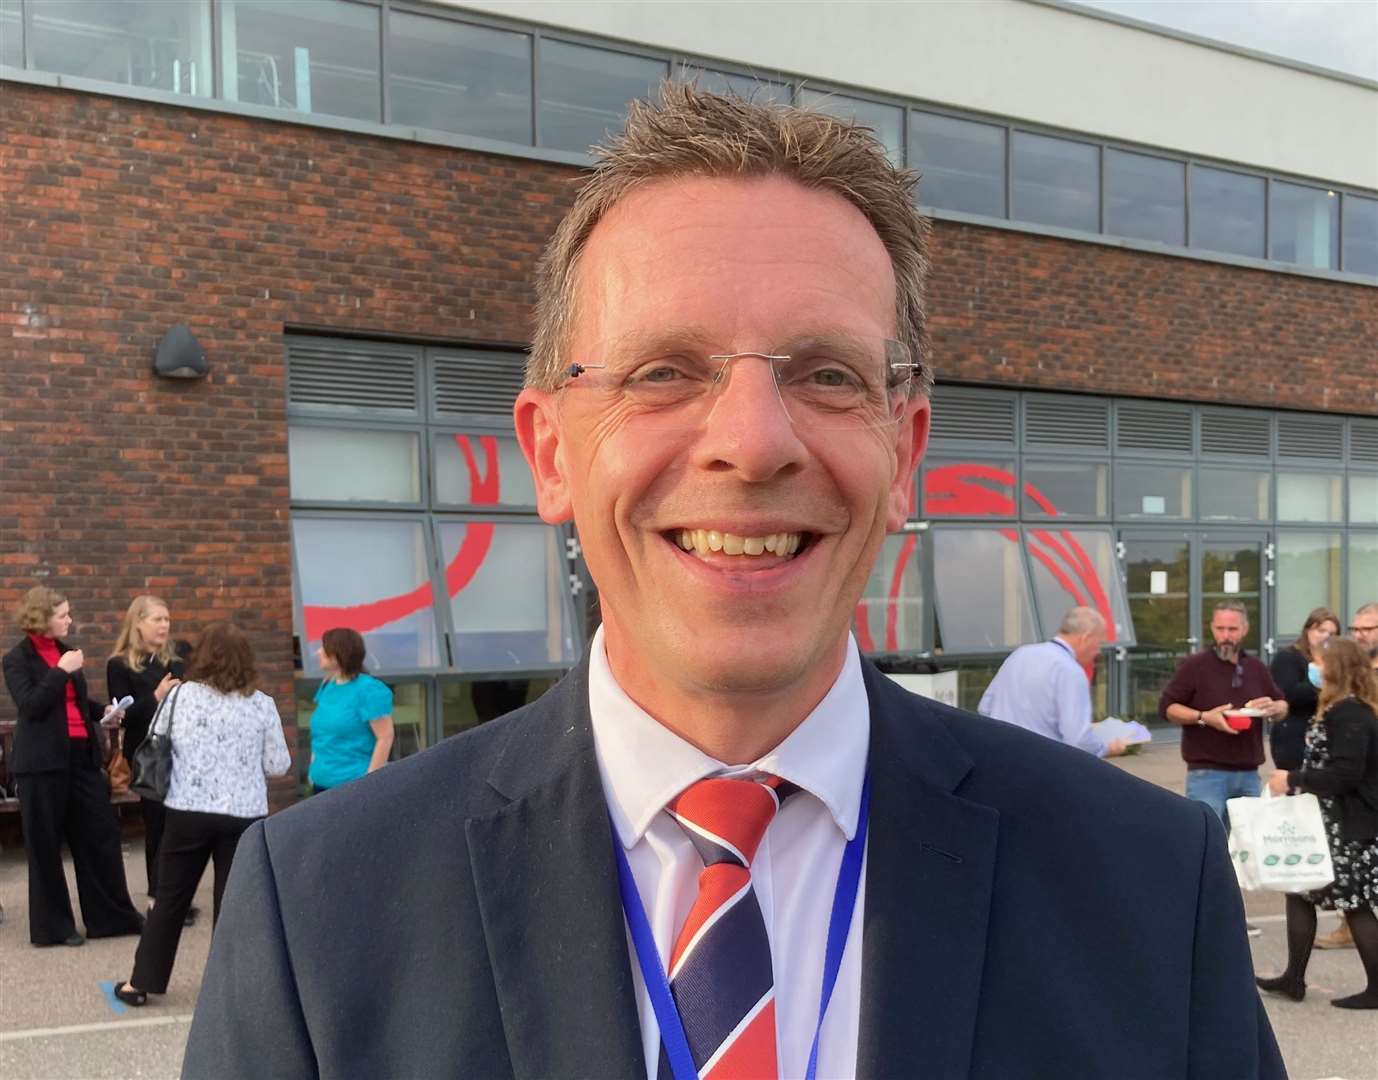 Andy Booth, executive principal of Oasis Academy Isle of Sheppey